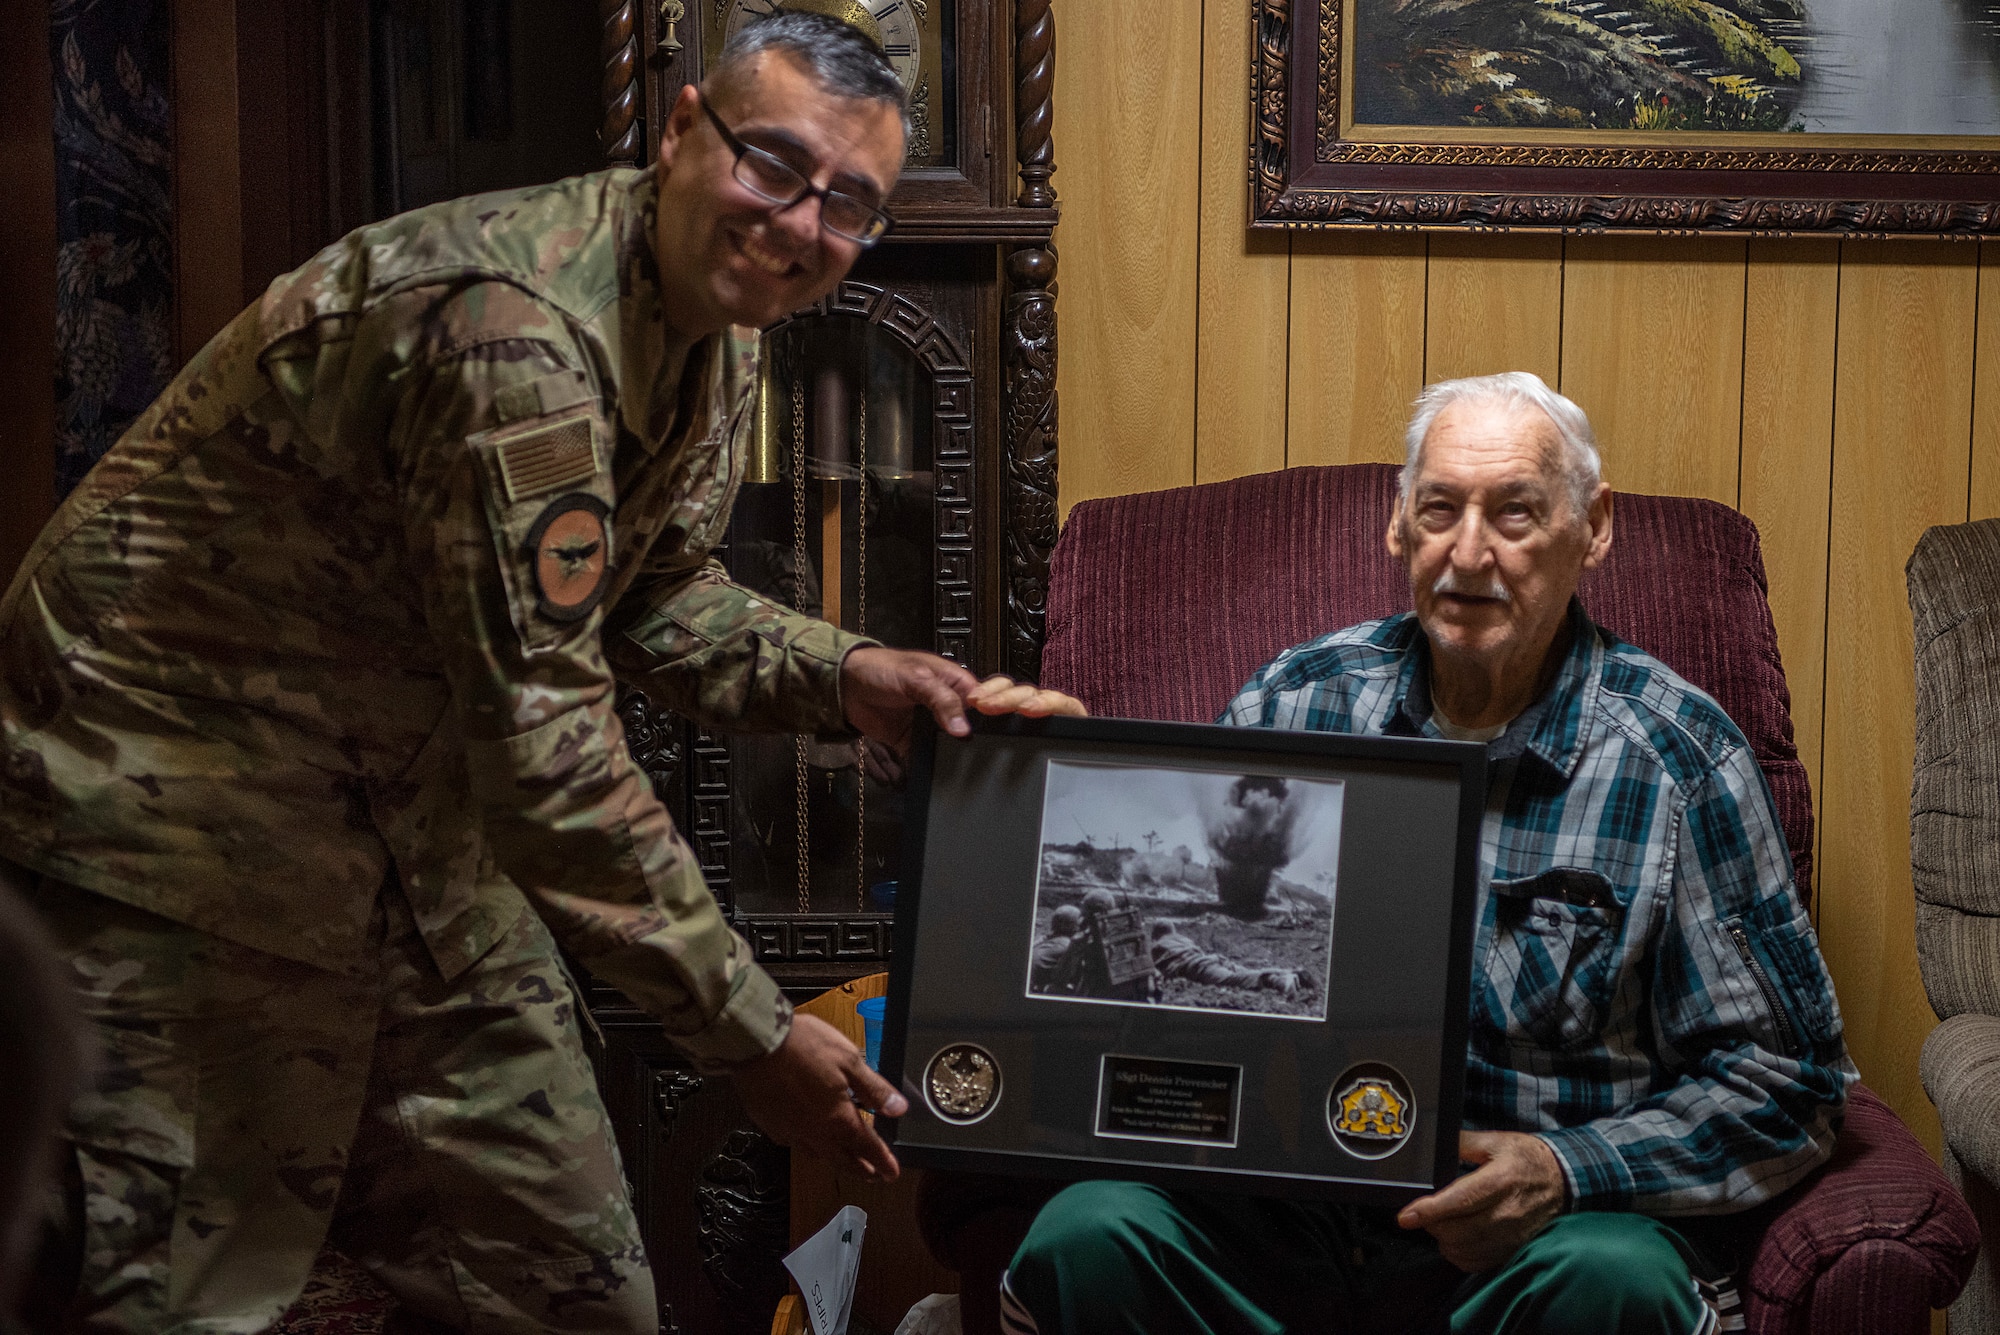 Retired U.S. Air Force Staff Sergeant Dennis Provencher, airborne and ground radio operator, right, talks with a group of Airmen including Lt. Col. Daniel Waid, 18th Communications Squadron commander, left, about how much has changed since Provencher initially joined in 1951 on Dec. 23, 2019, in Okinawa City, Okinawa. Provencher is a Guinness Book of World Records holder for most amount of blood donated. (U.S. Air Force Photo by Airman 1st Class Rebeckah Medeiros)